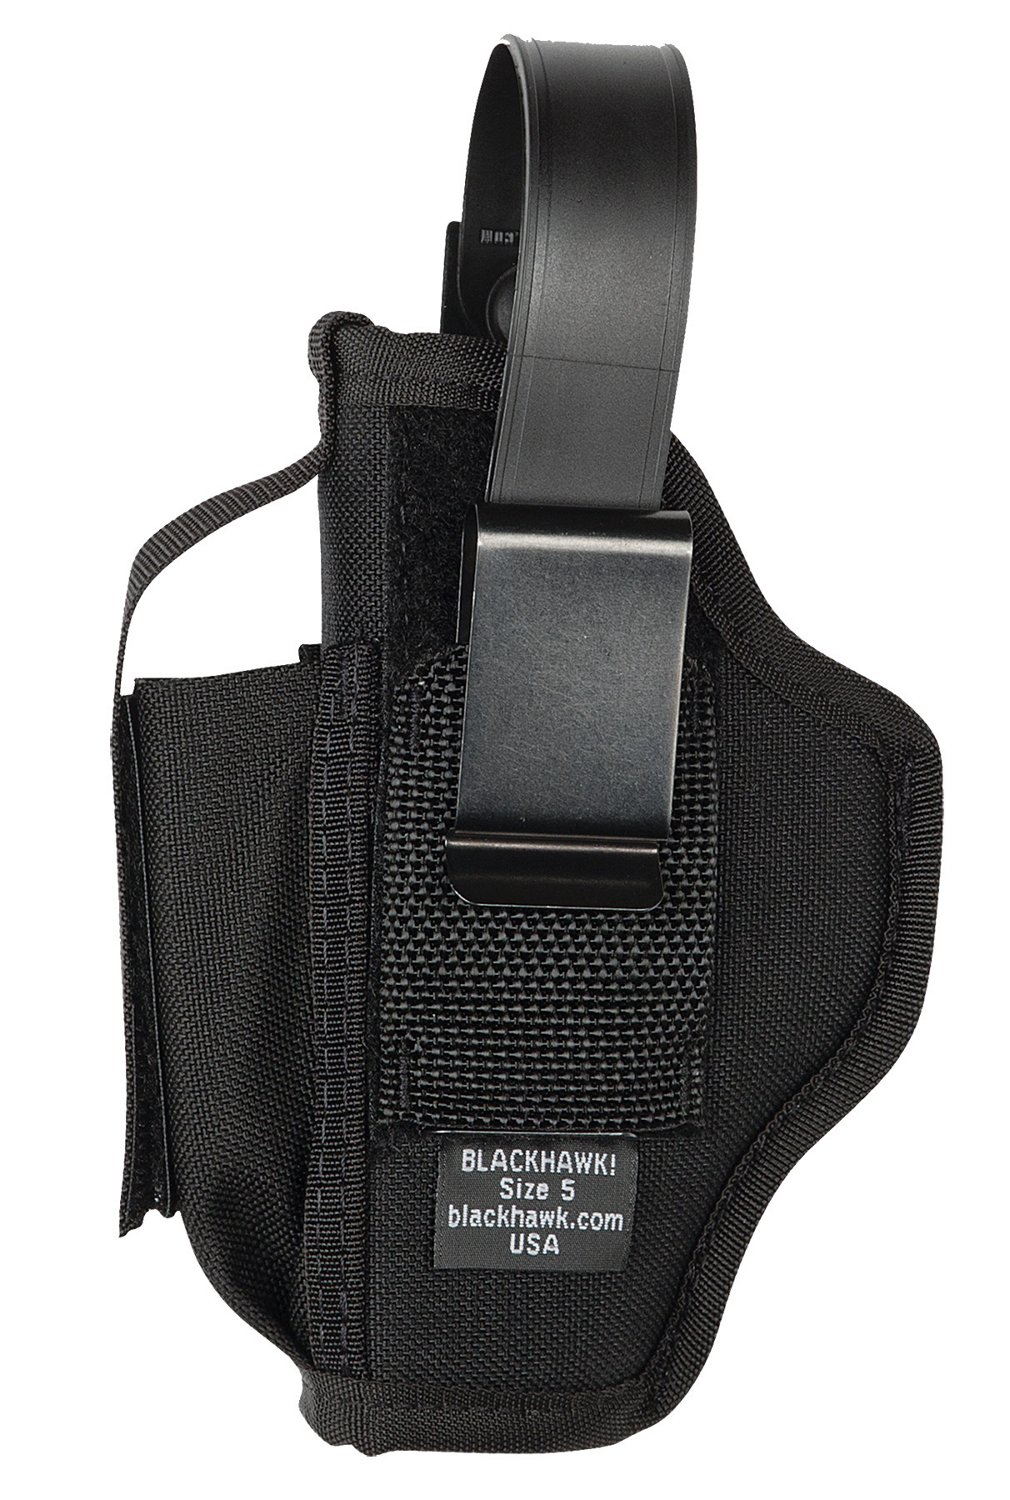 Blackhawk Holster with Magazine Pouch